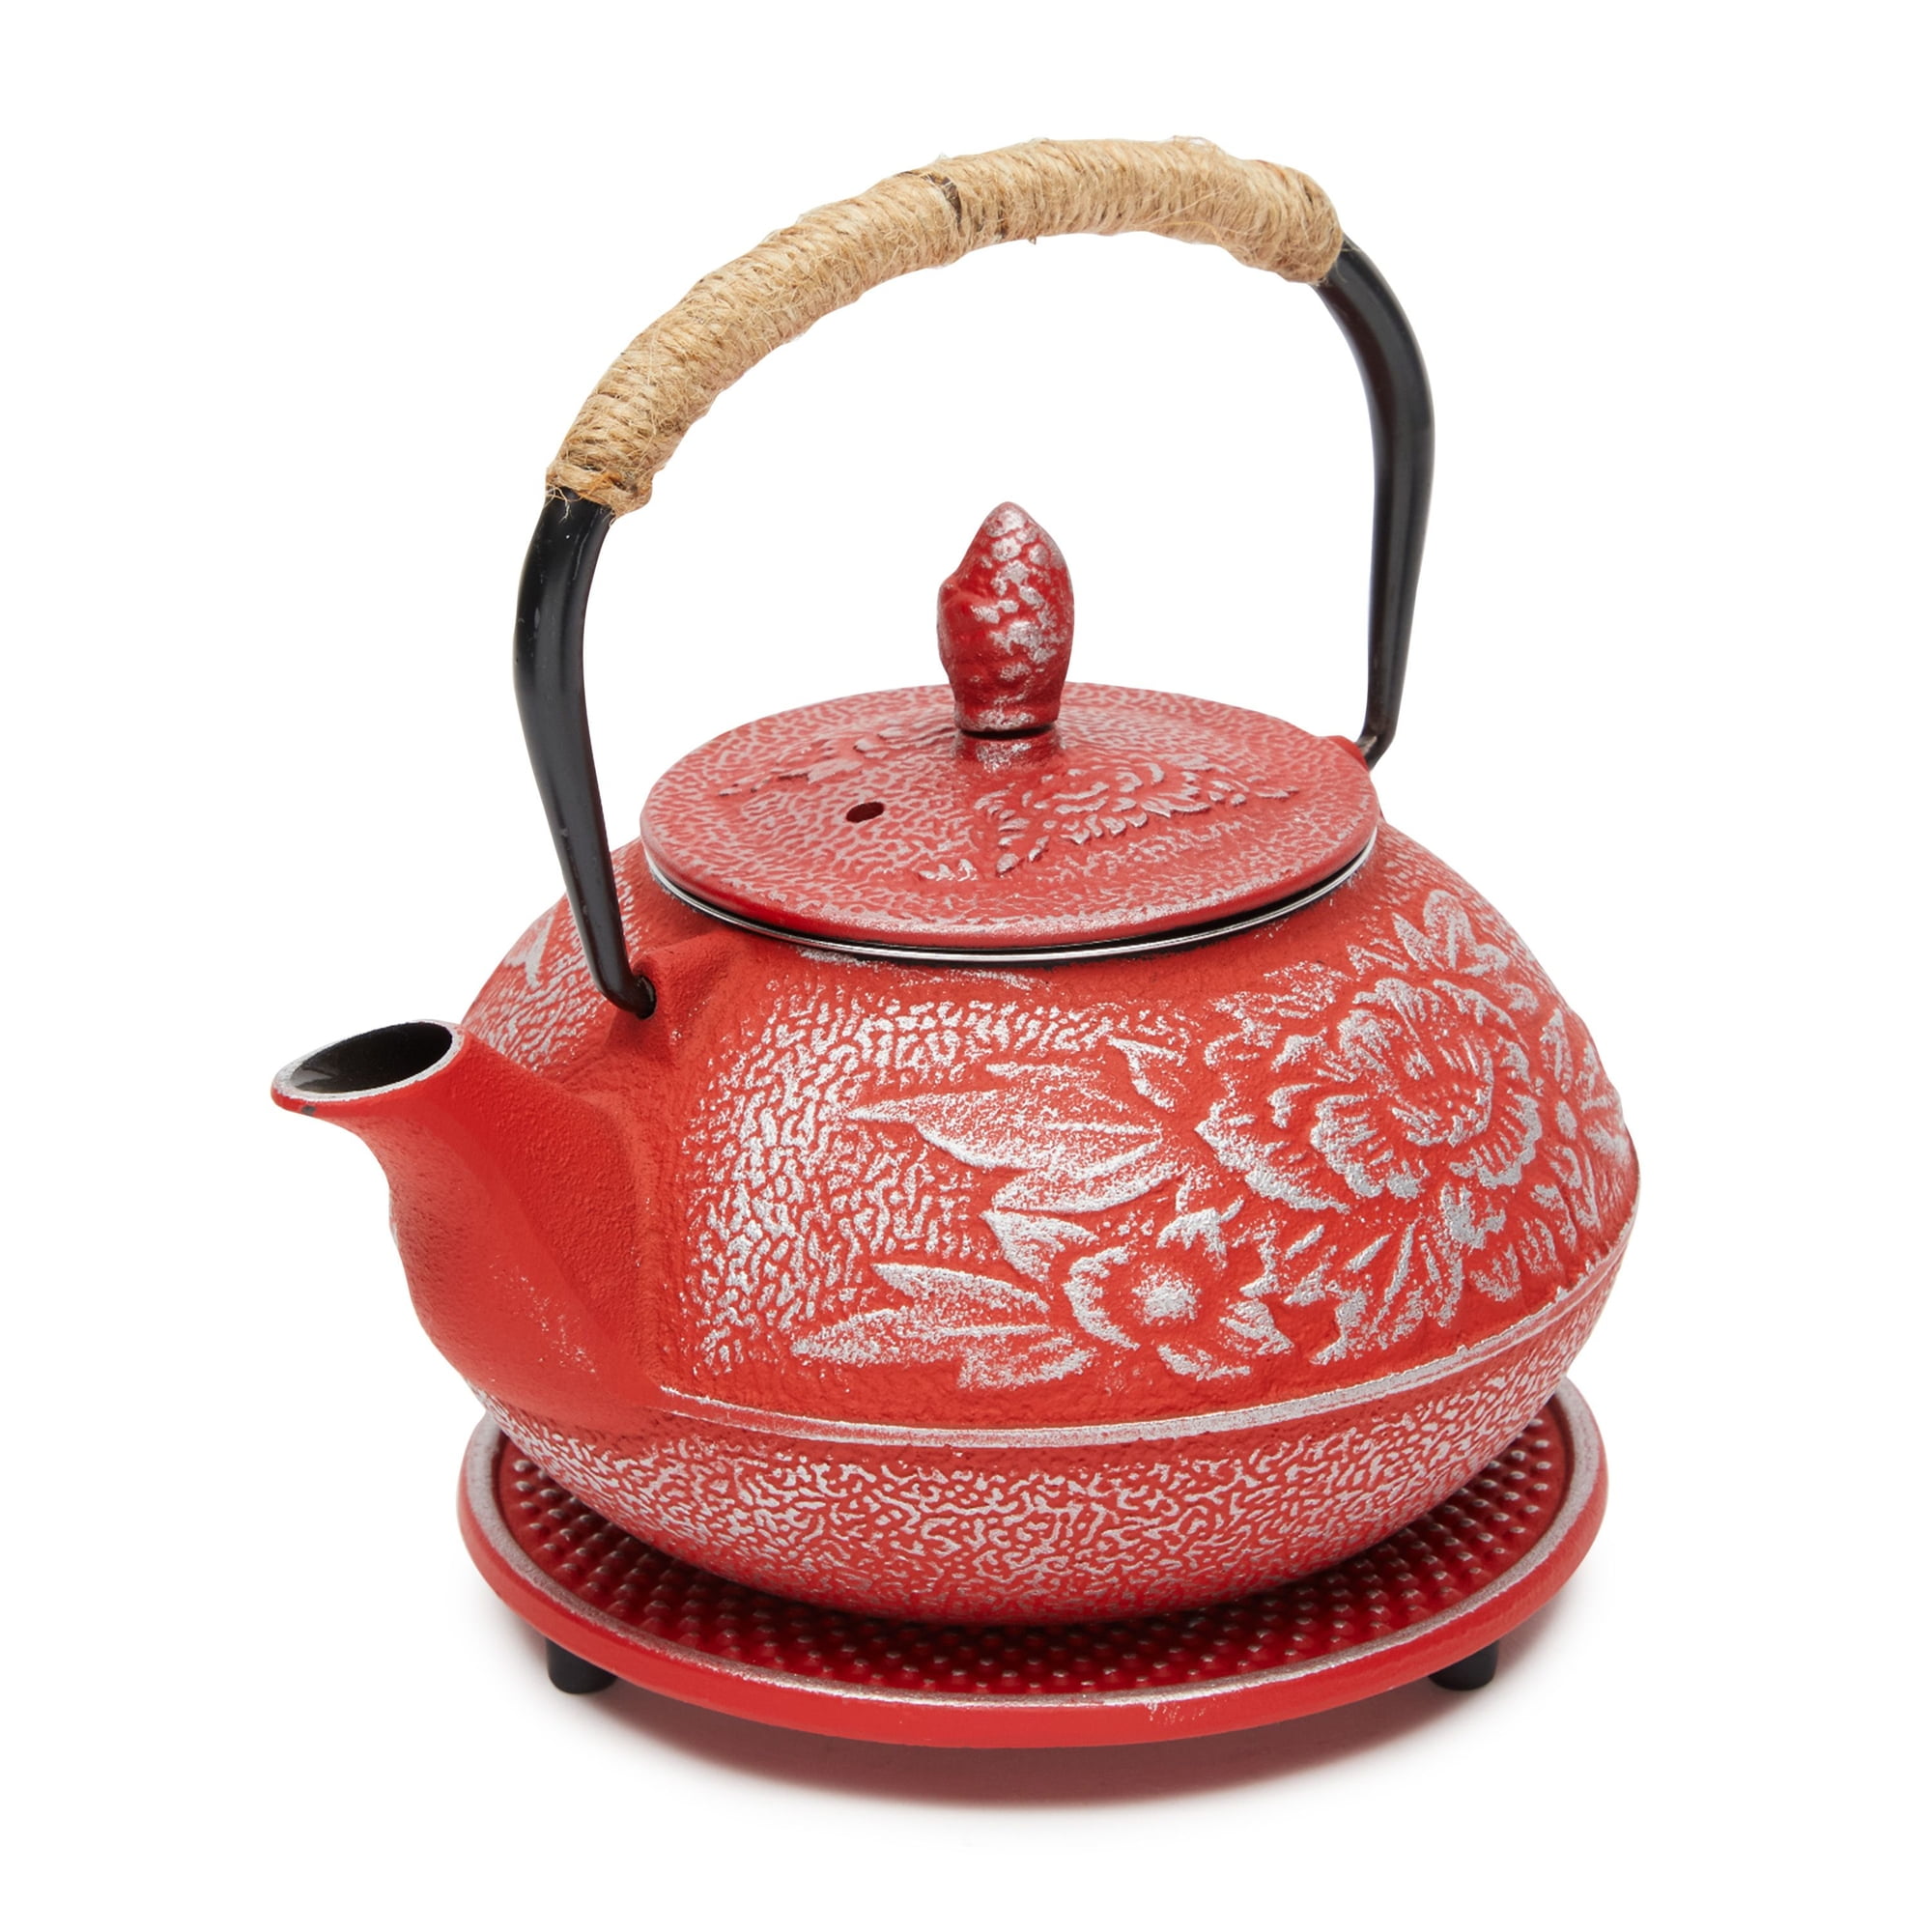 ENERGE SPRING 800ML Cast Iron Teapot Japanese-style Boiling Kettle